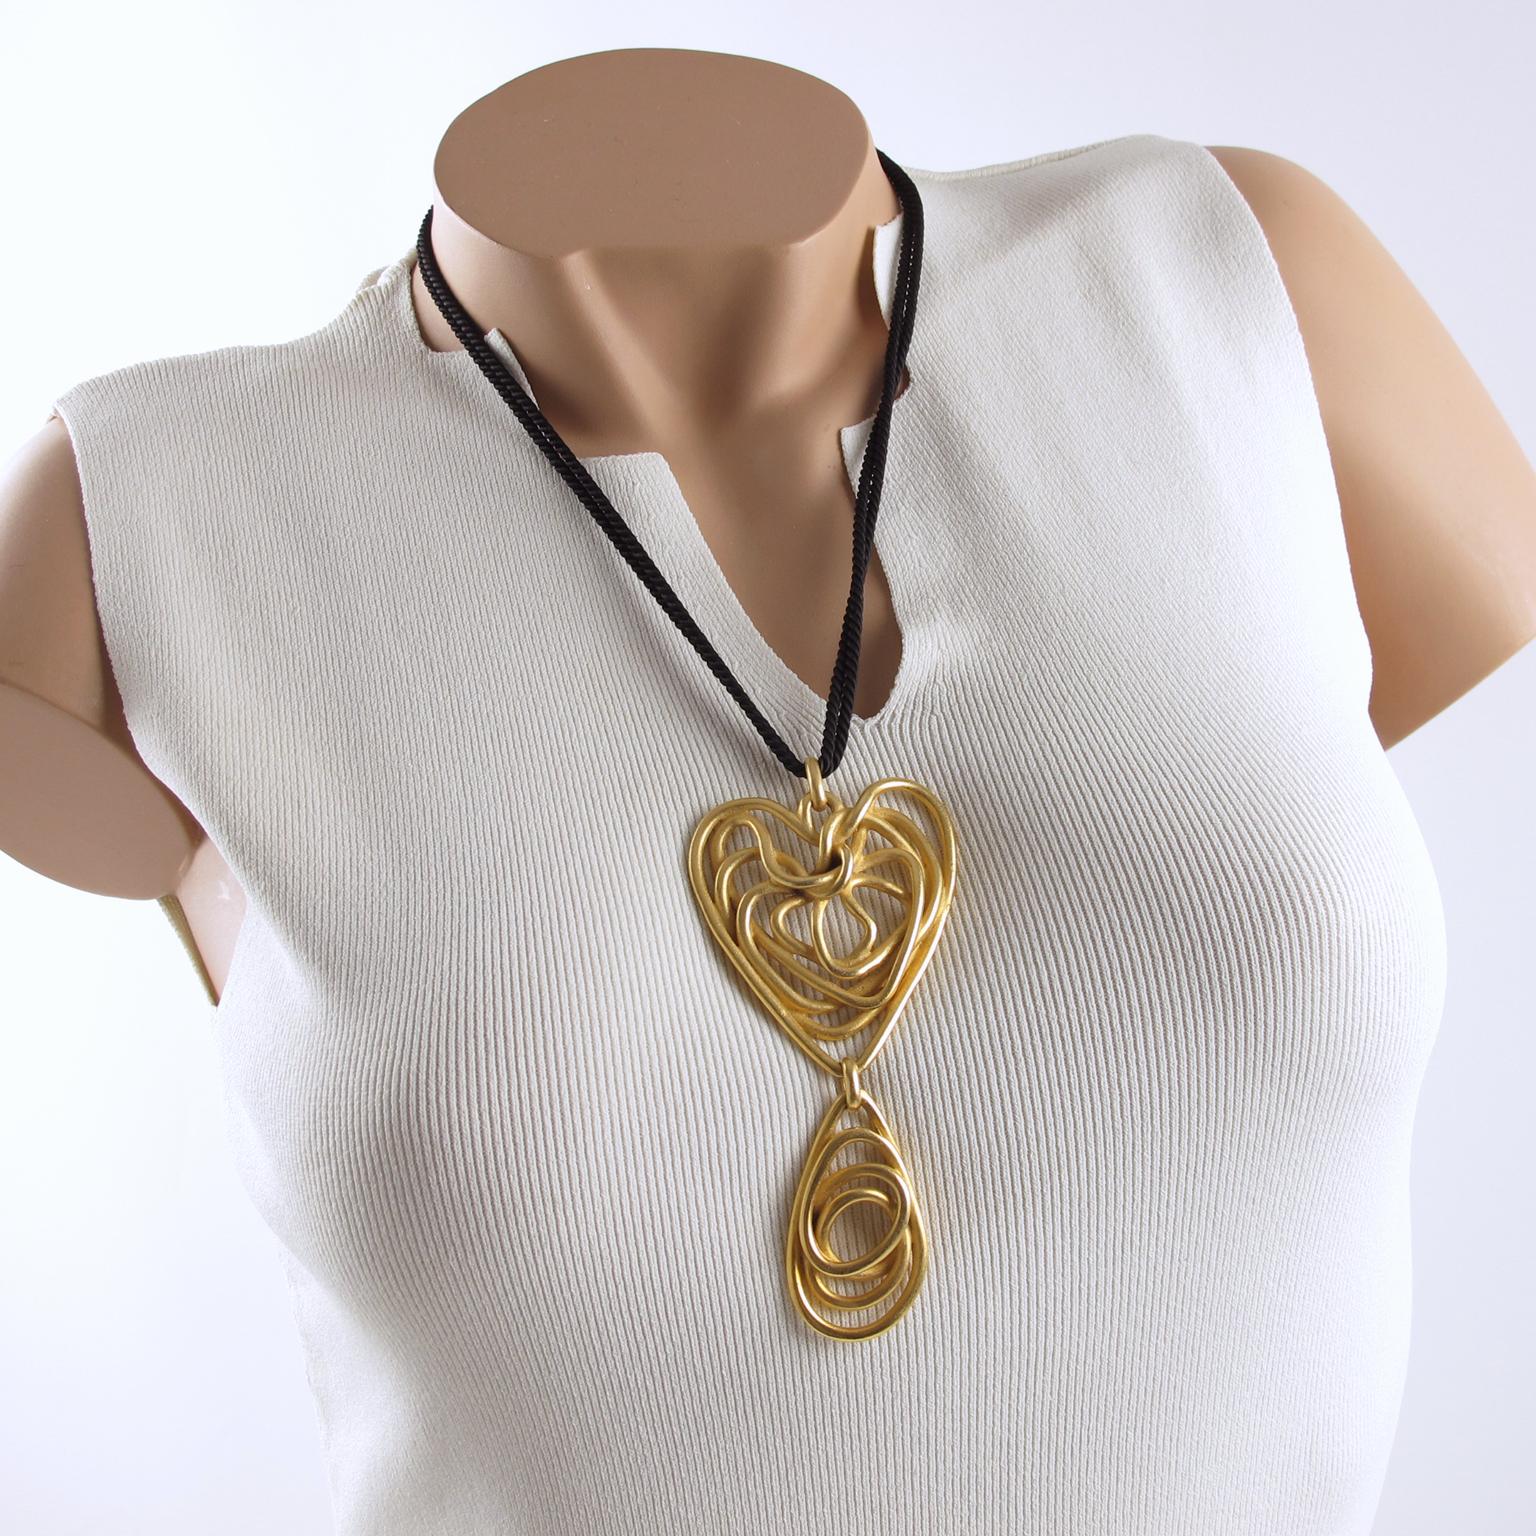 Elegant Balenciaga Paris signed pendant necklace. Massive gilt metal wired spiral design, articulated dangle shape with brushed finish aspect. Engraved signature at the back: 'Balenciaga Paris'. Long double strand black silk twisted chain with